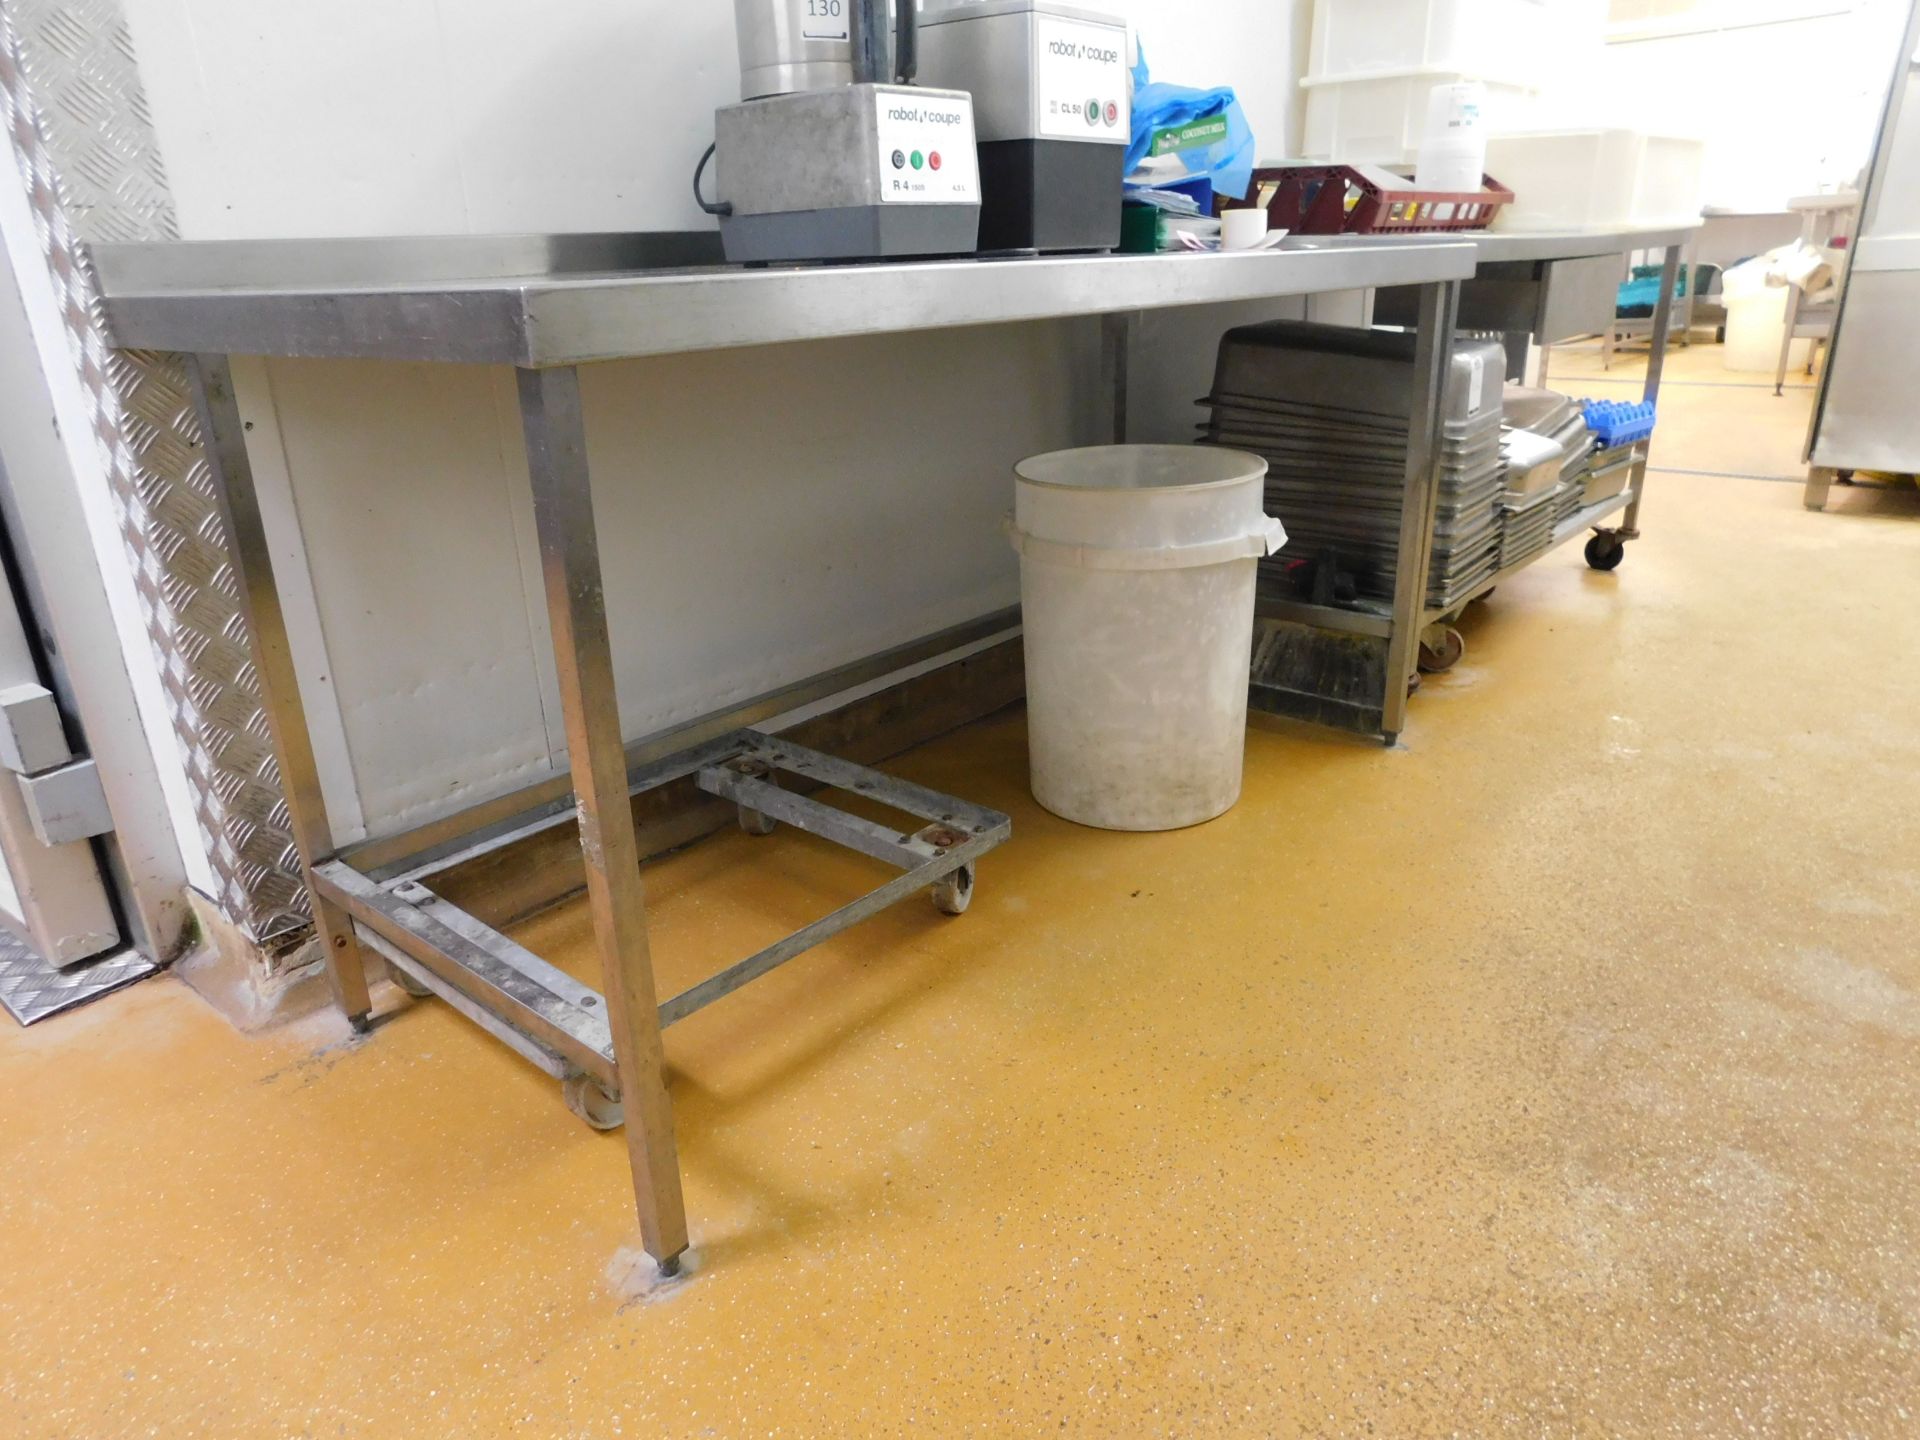 2 Stainless Steel Preparation Tables & Contents of Trays etc. (Location: Thame. Please Refer to